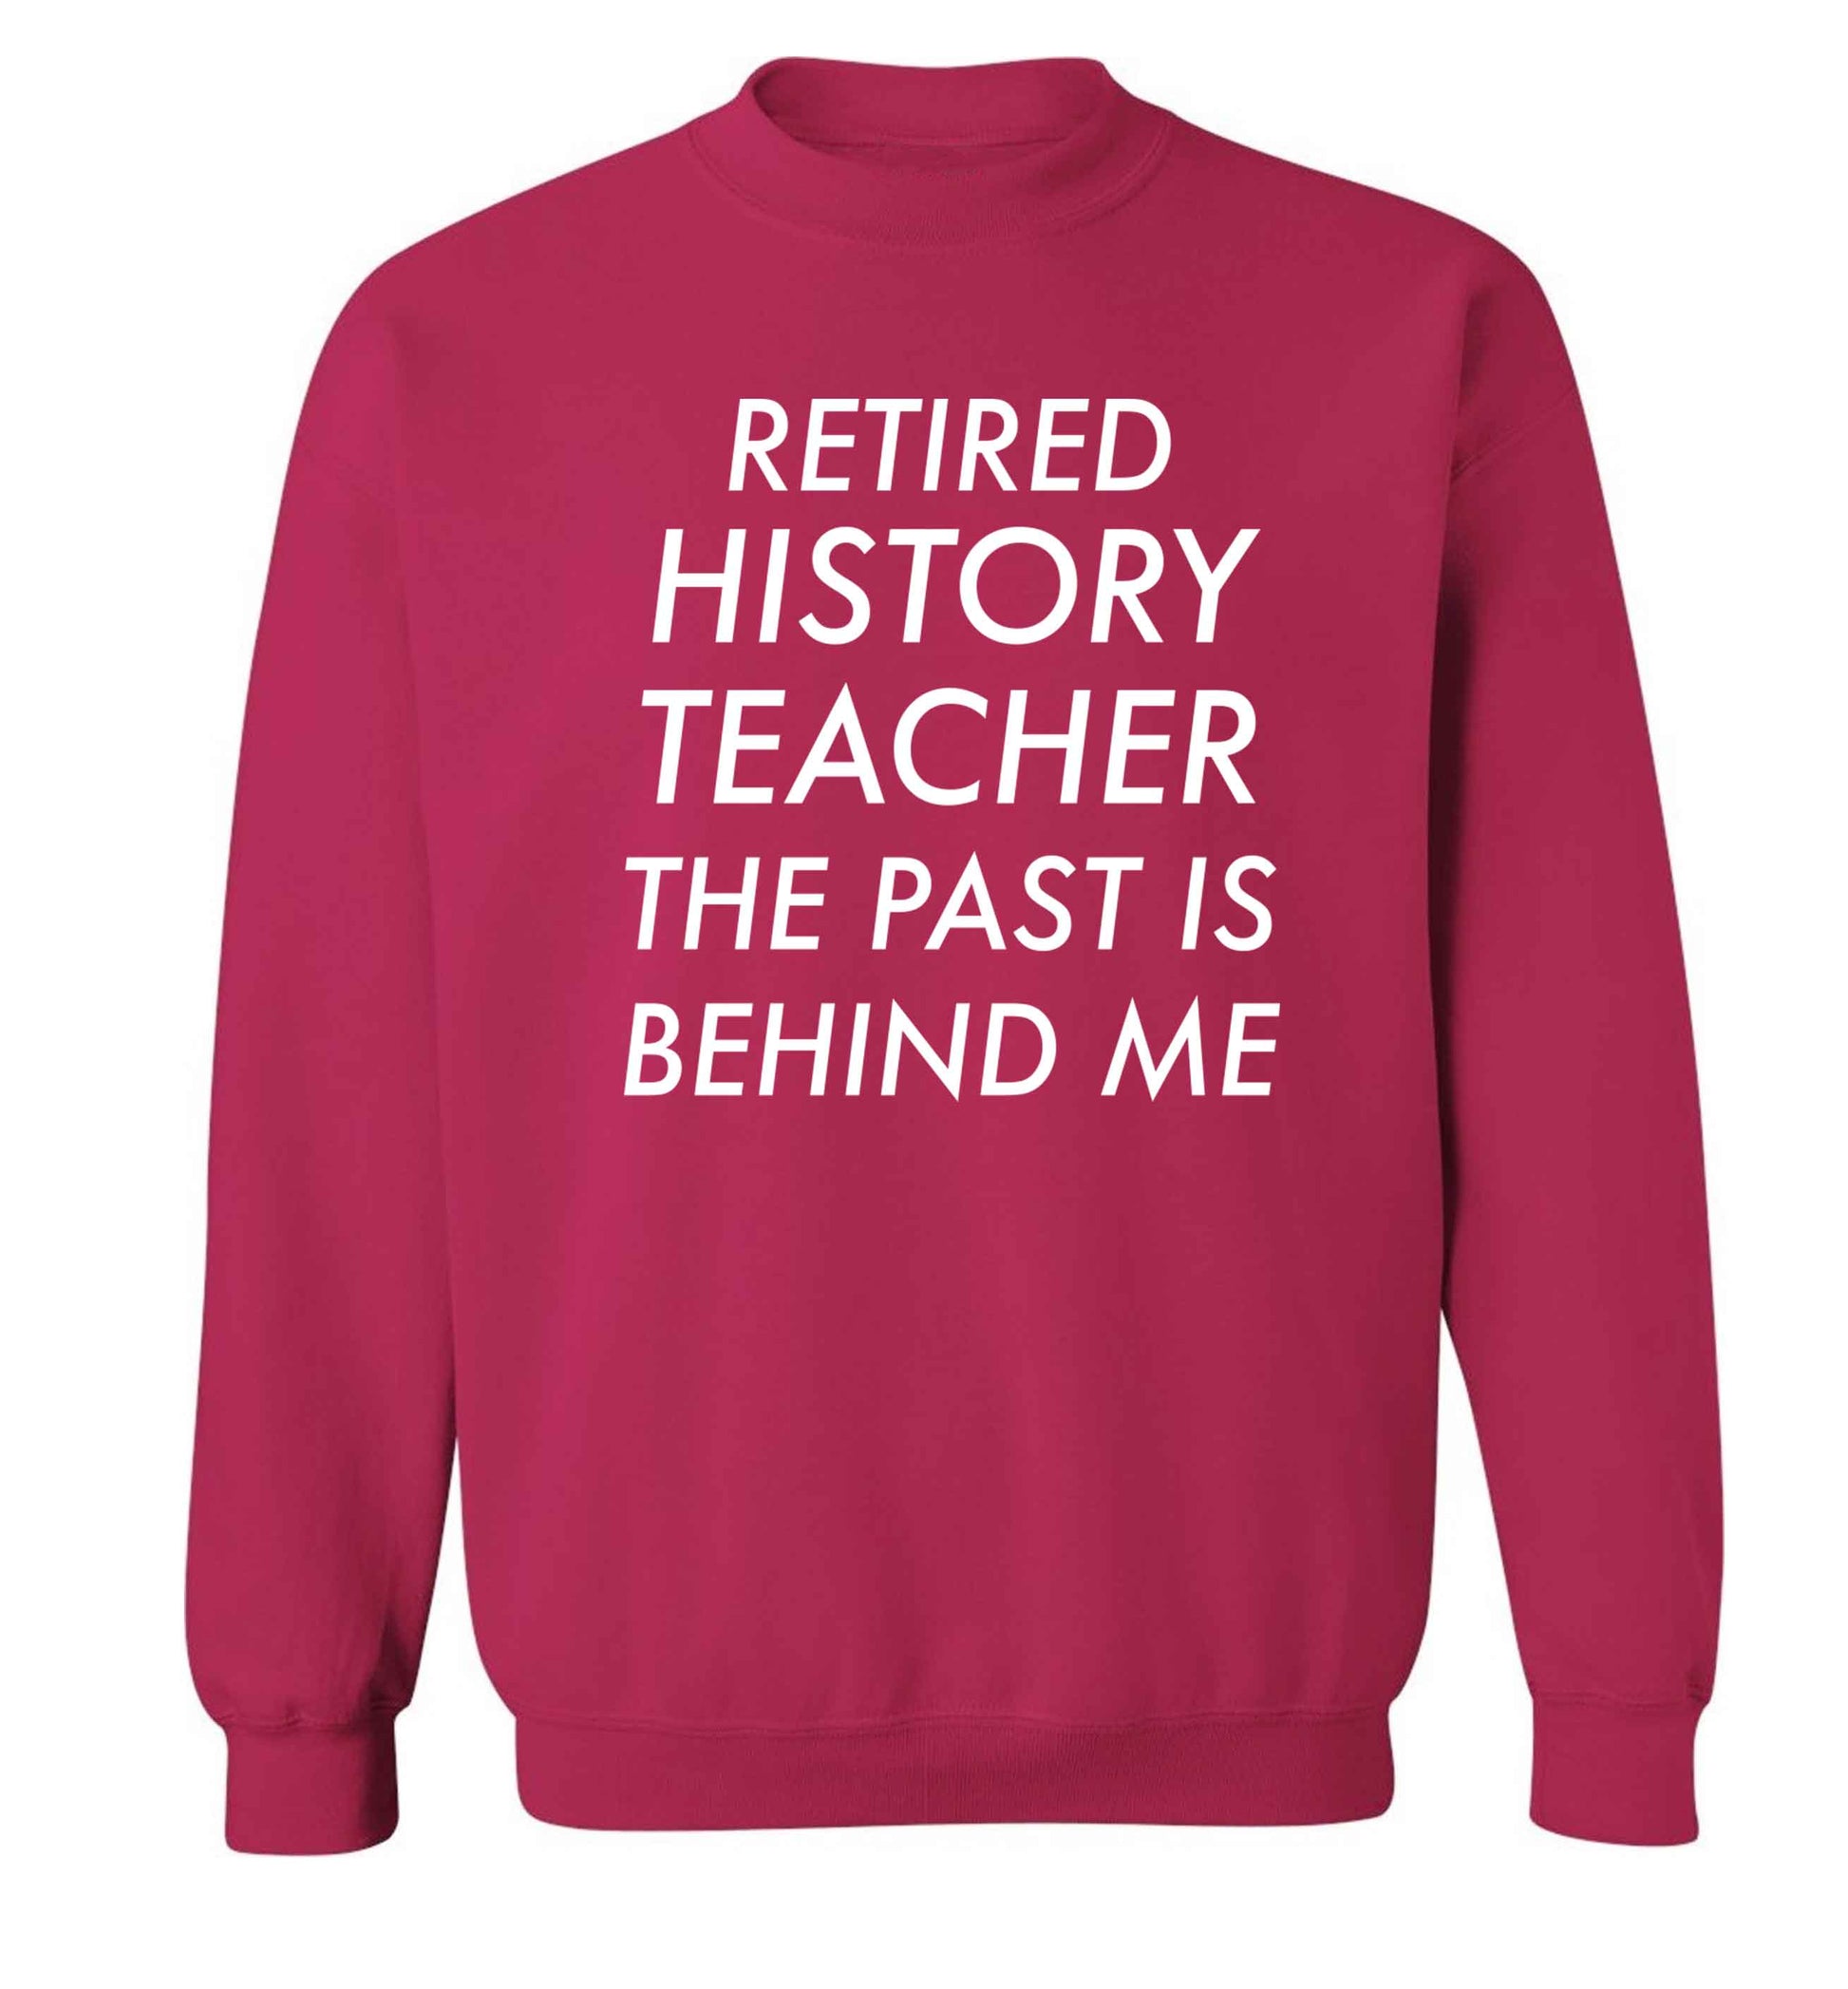 Retired history teacher the past is behind me Adult's unisex pink Sweater 2XL